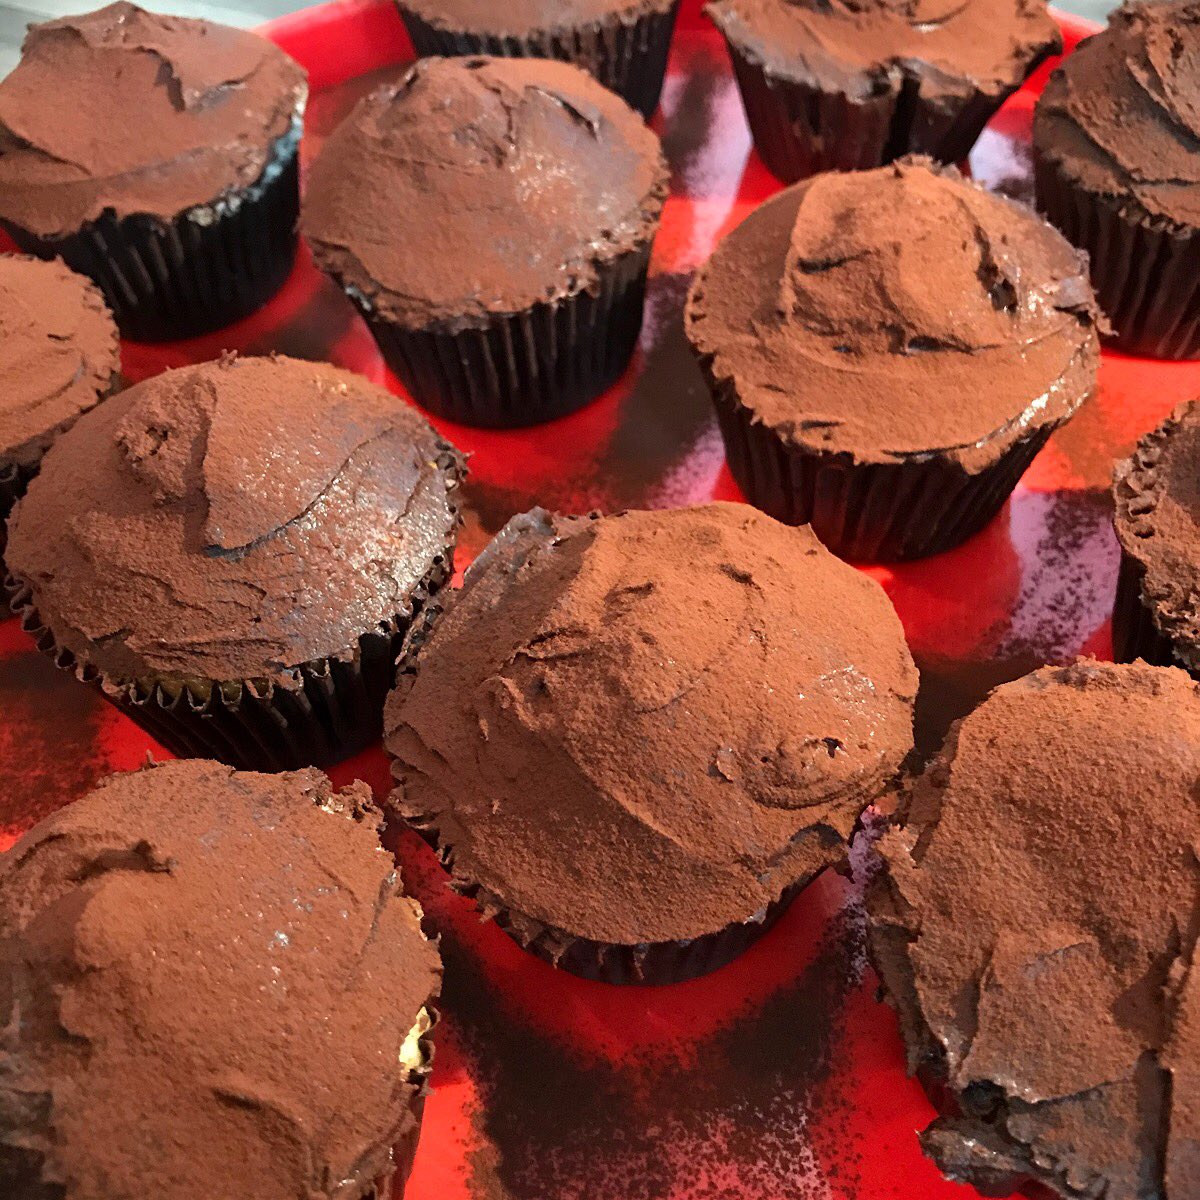 A @hummingbbakery recipe...soft and fluffy vanilla cupcakes with a custard center and a rich chocolate frosting...Boston Cream Pie Cupcakes #baking #passion #cupcakes #vanilla #chocolate #custard #americanrecipe